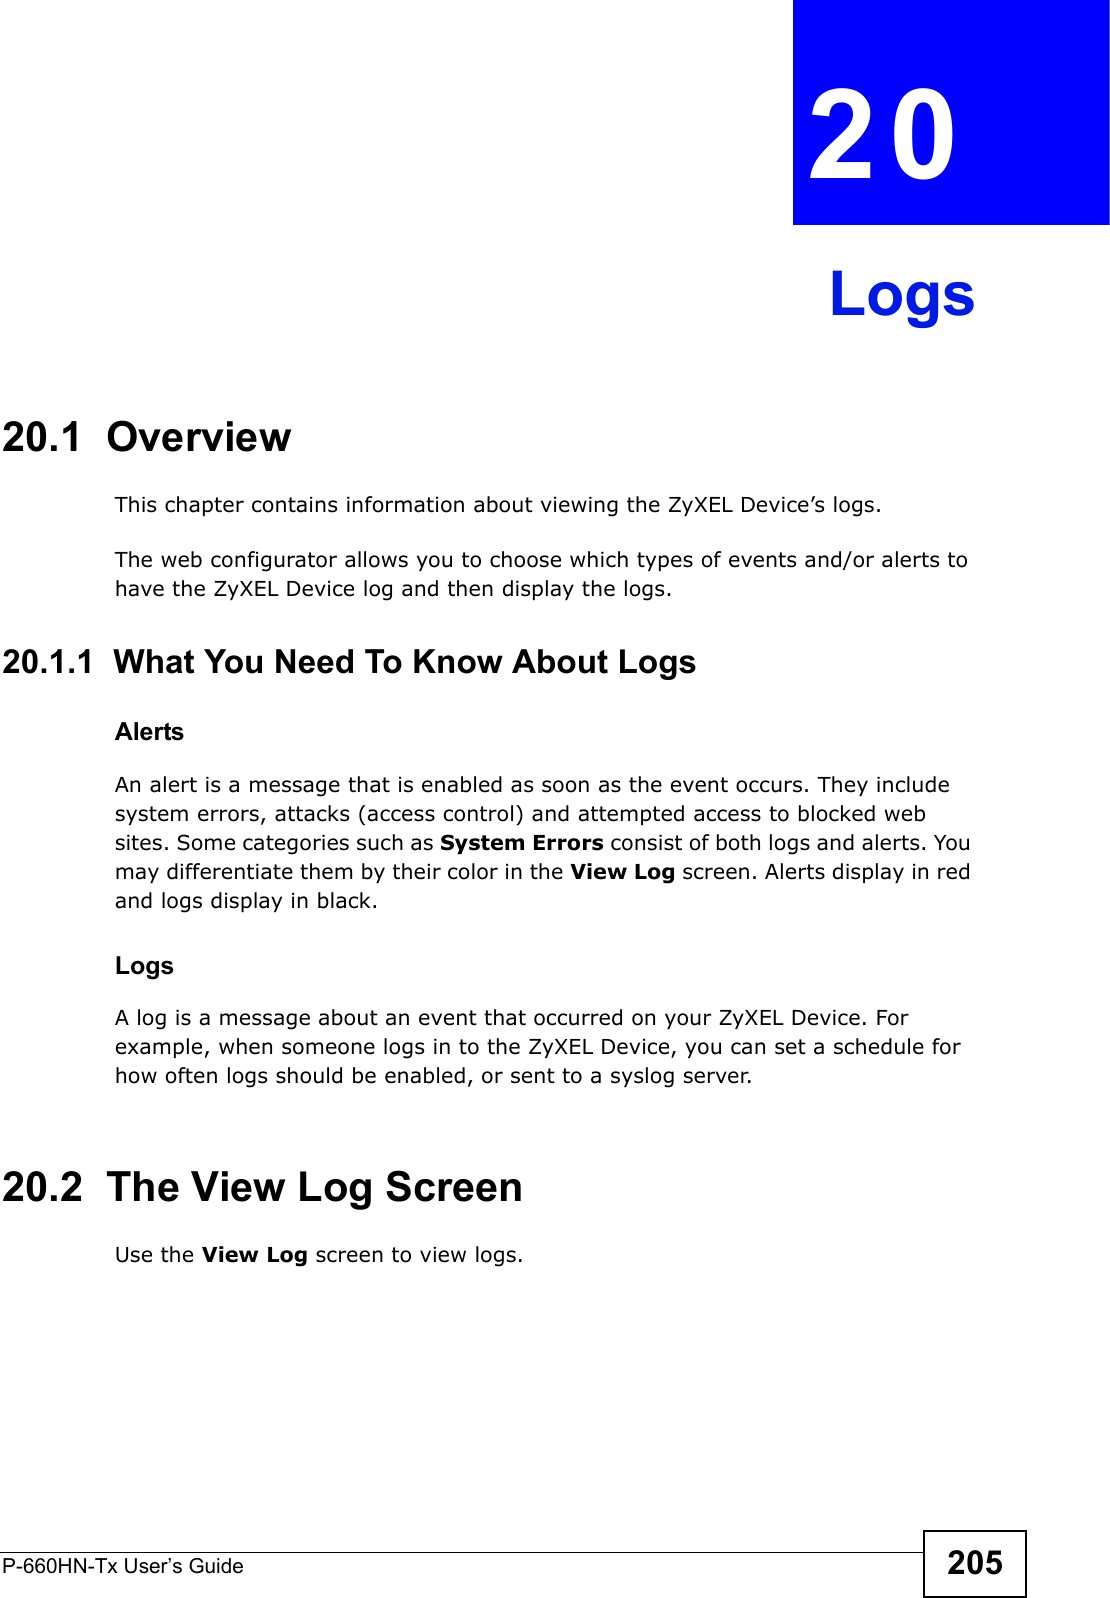 P-660HN-Tx User’s Guide 205CHAPTER  20 Logs20.1  OverviewThis chapter contains information about viewing the ZyXEL Device’s logs.The web configurator allows you to choose which types of events and/or alerts to have the ZyXEL Device log and then display the logs. 20.1.1  What You Need To Know About LogsAlertsAn alert is a message that is enabled as soon as the event occurs. They include system errors, attacks (access control) and attempted access to blocked web sites. Some categories such as System Errors consist of both logs and alerts. You may differentiate them by their color in the View Log screen. Alerts display in red and logs display in black.LogsA log is a message about an event that occurred on your ZyXEL Device. For example, when someone logs in to the ZyXEL Device, you can set a schedule for how often logs should be enabled, or sent to a syslog server.20.2  The View Log ScreenUse the View Log screen to view logs.